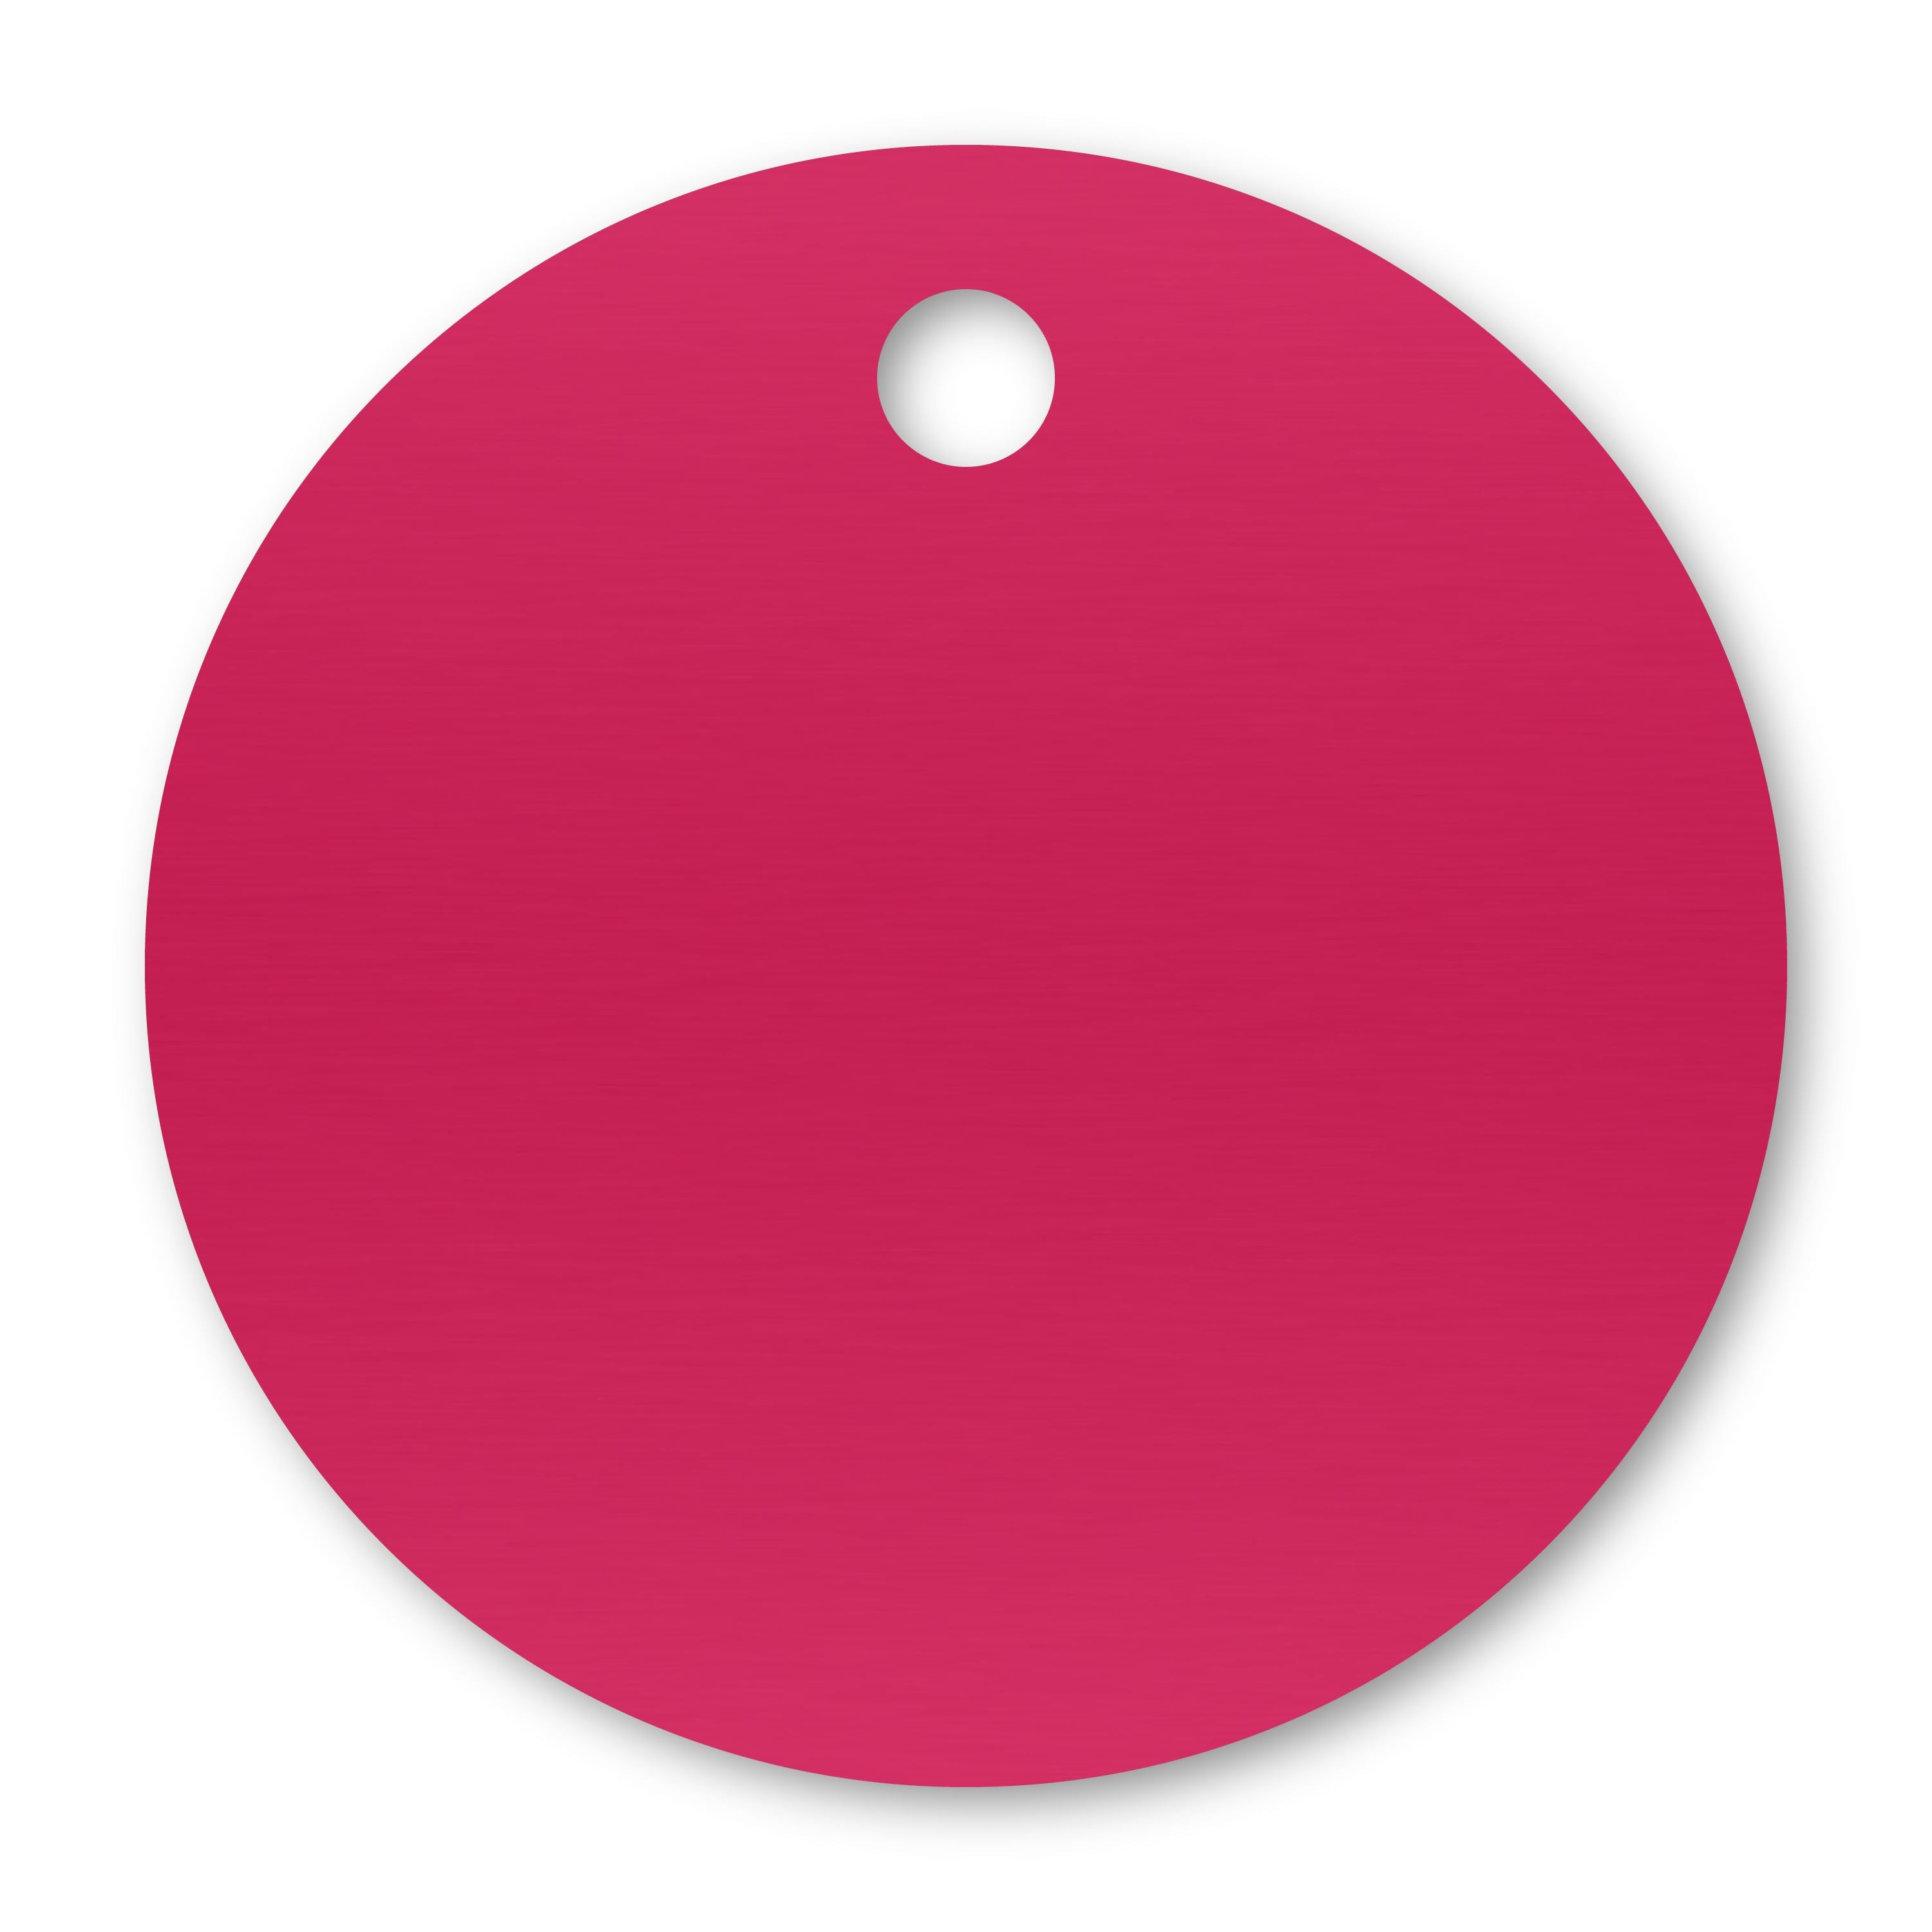 Anodized Aluminum Round Tags, 1" with 1/8" Hole, Laser Engraved Metal Tags Craftworks NW Pink 